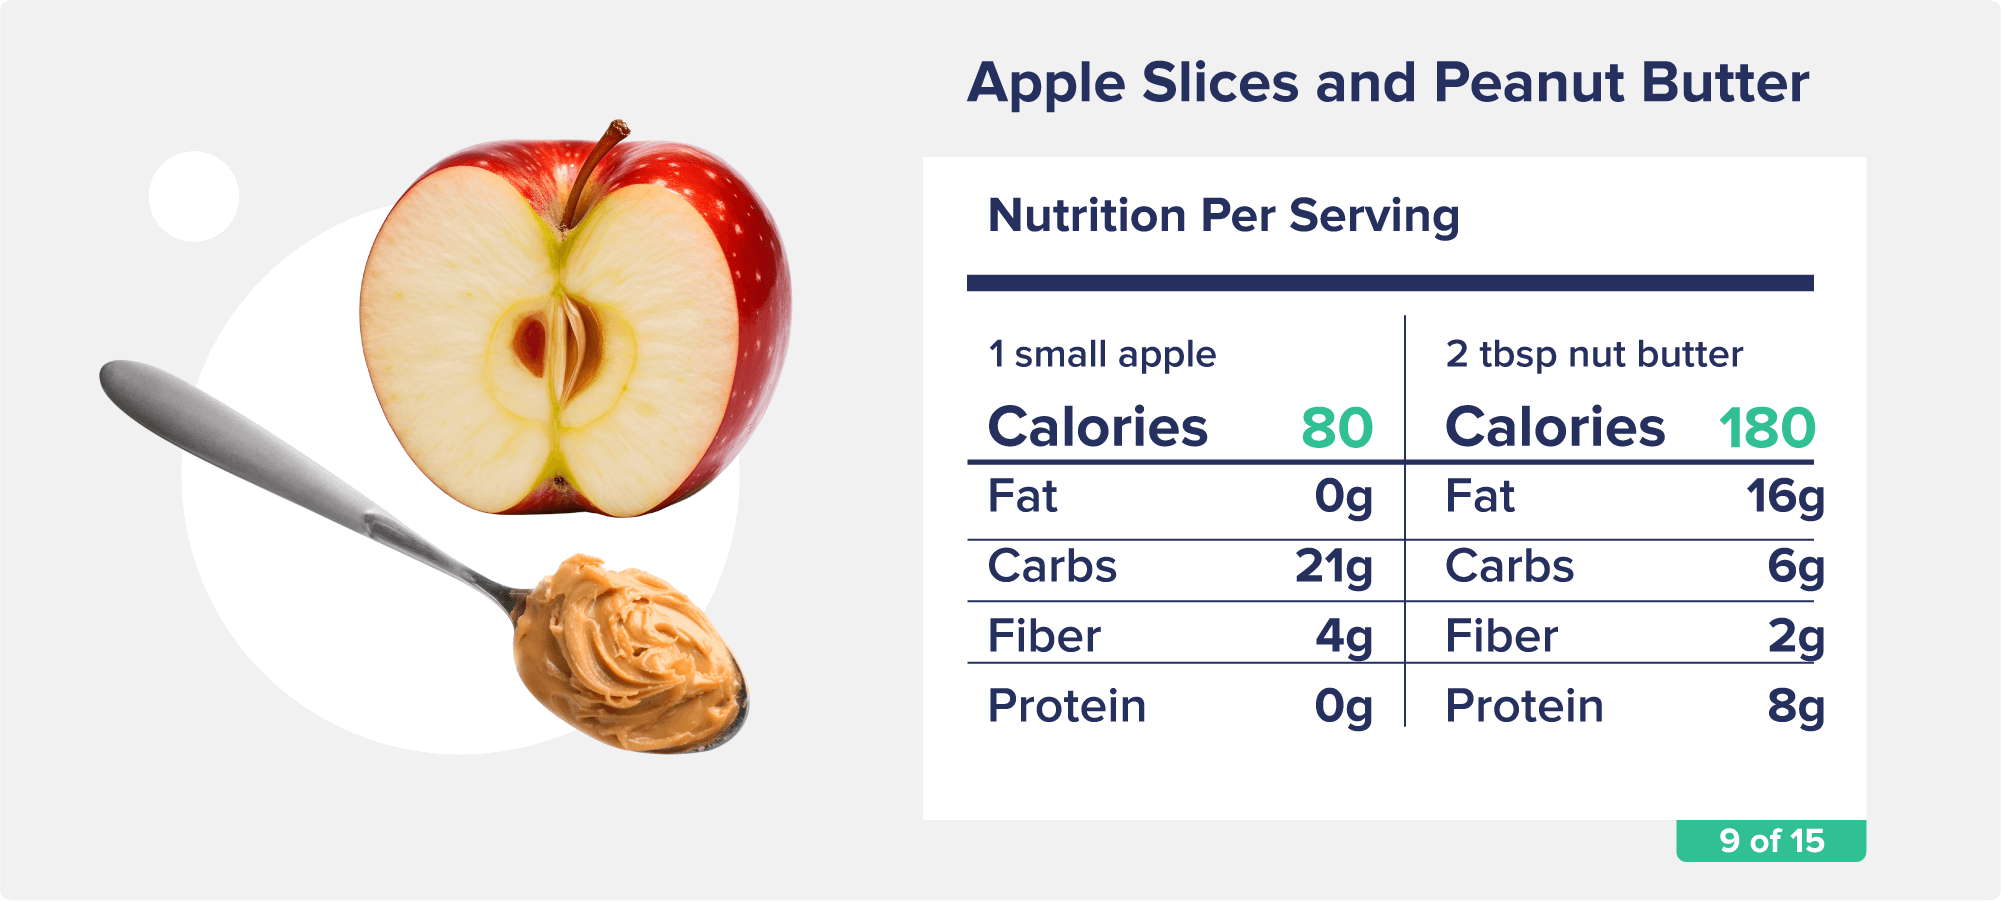 Half of an apple and a spoon with peanut butter on it along with with accompanying nutrition facts like calories, fat, and protein.